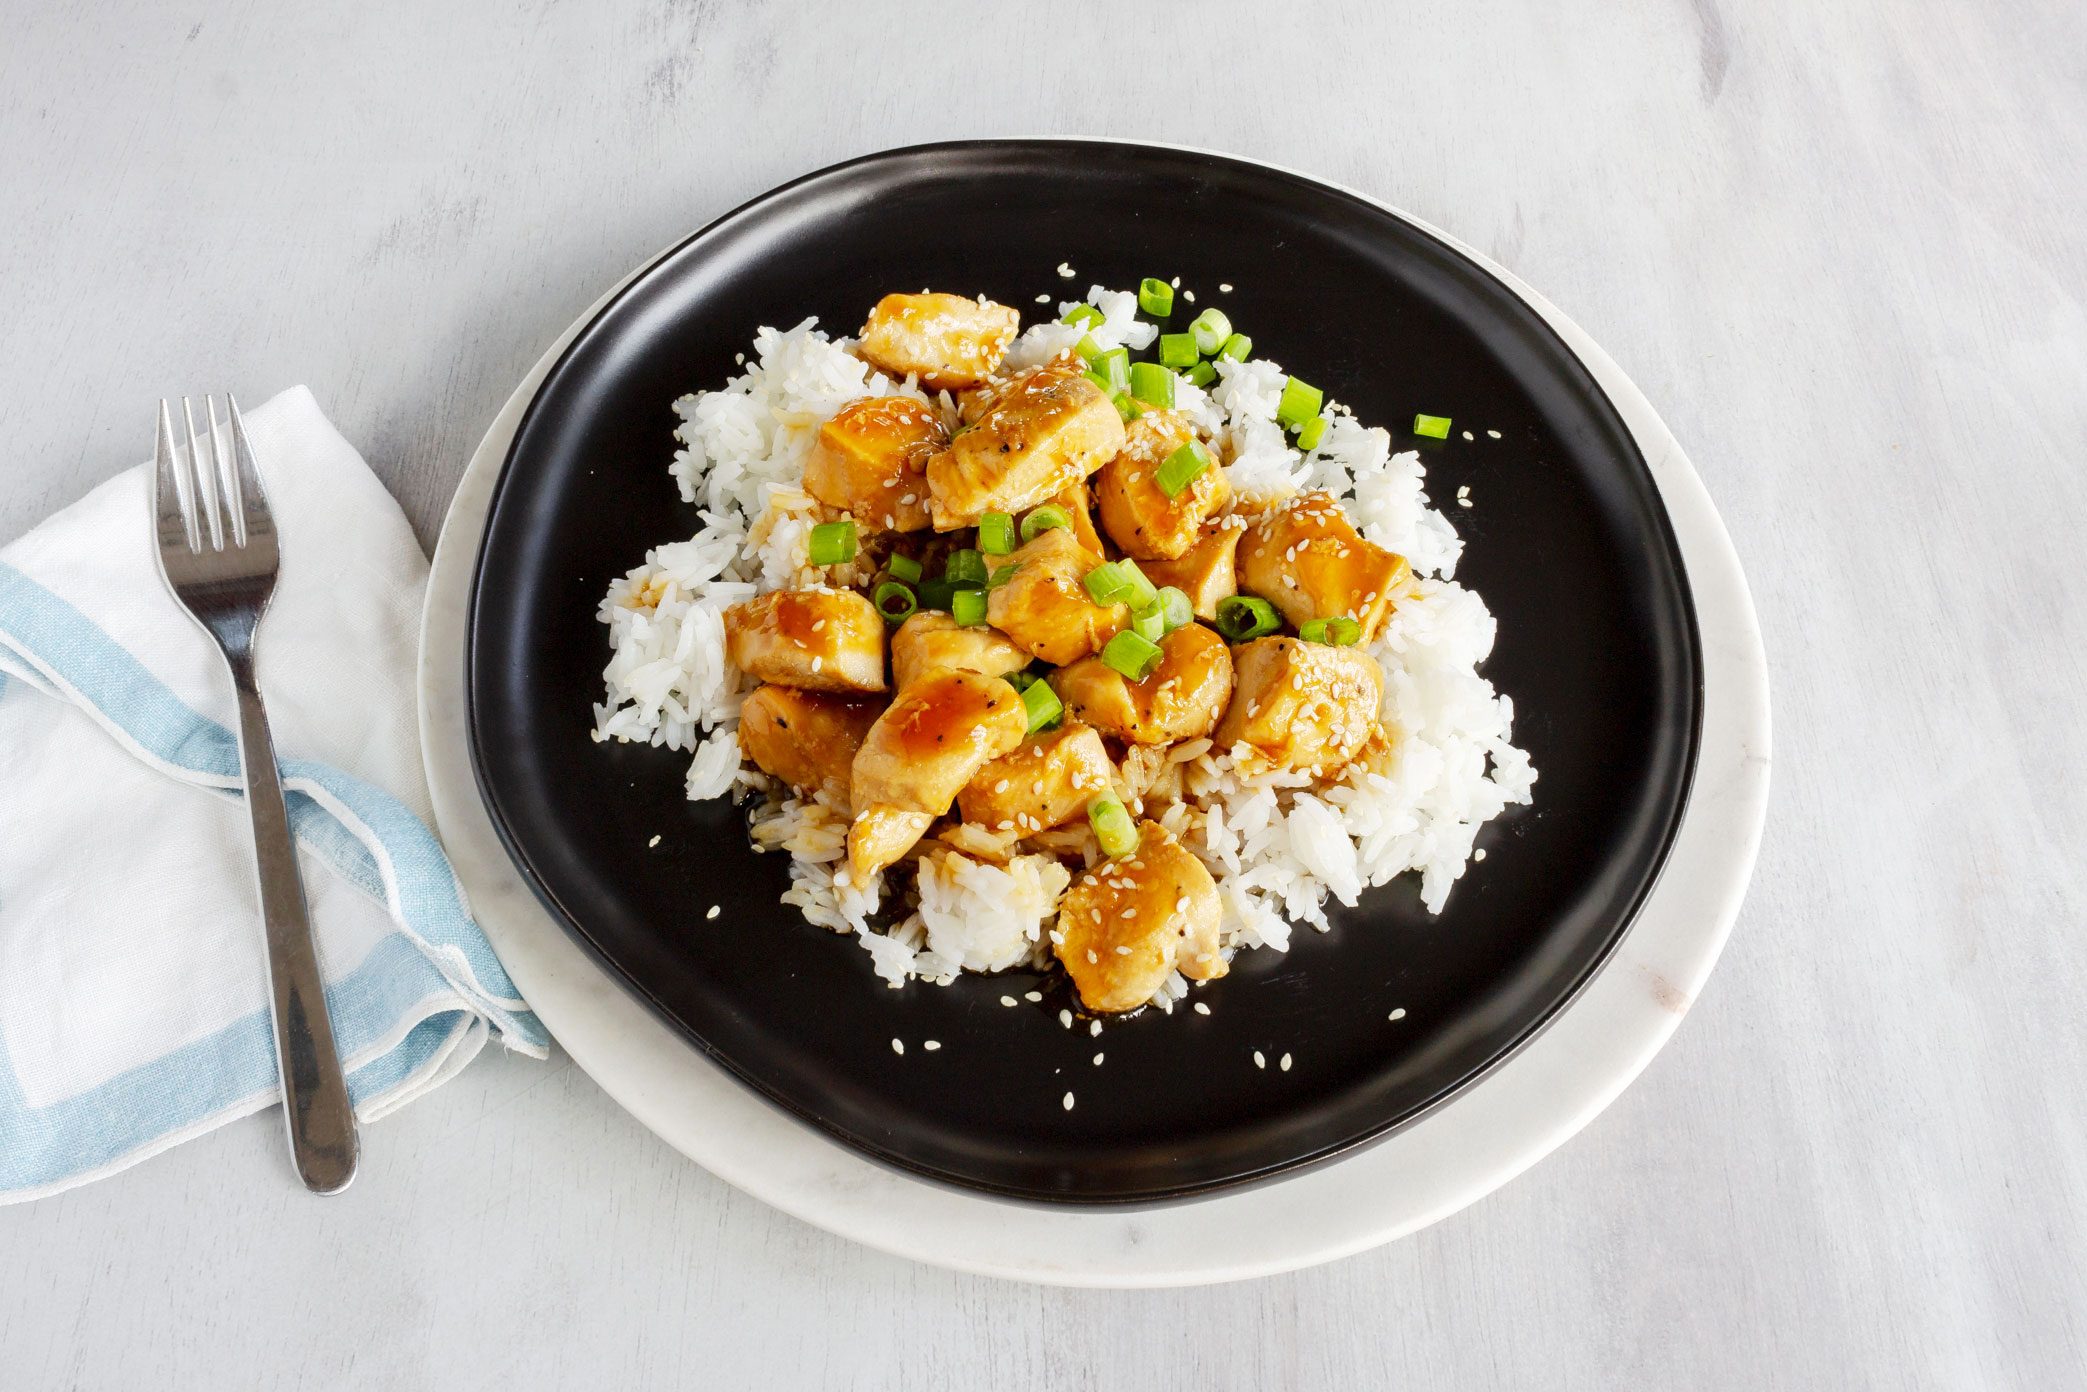 How To Make Our Teriyaki Chicken Recipe